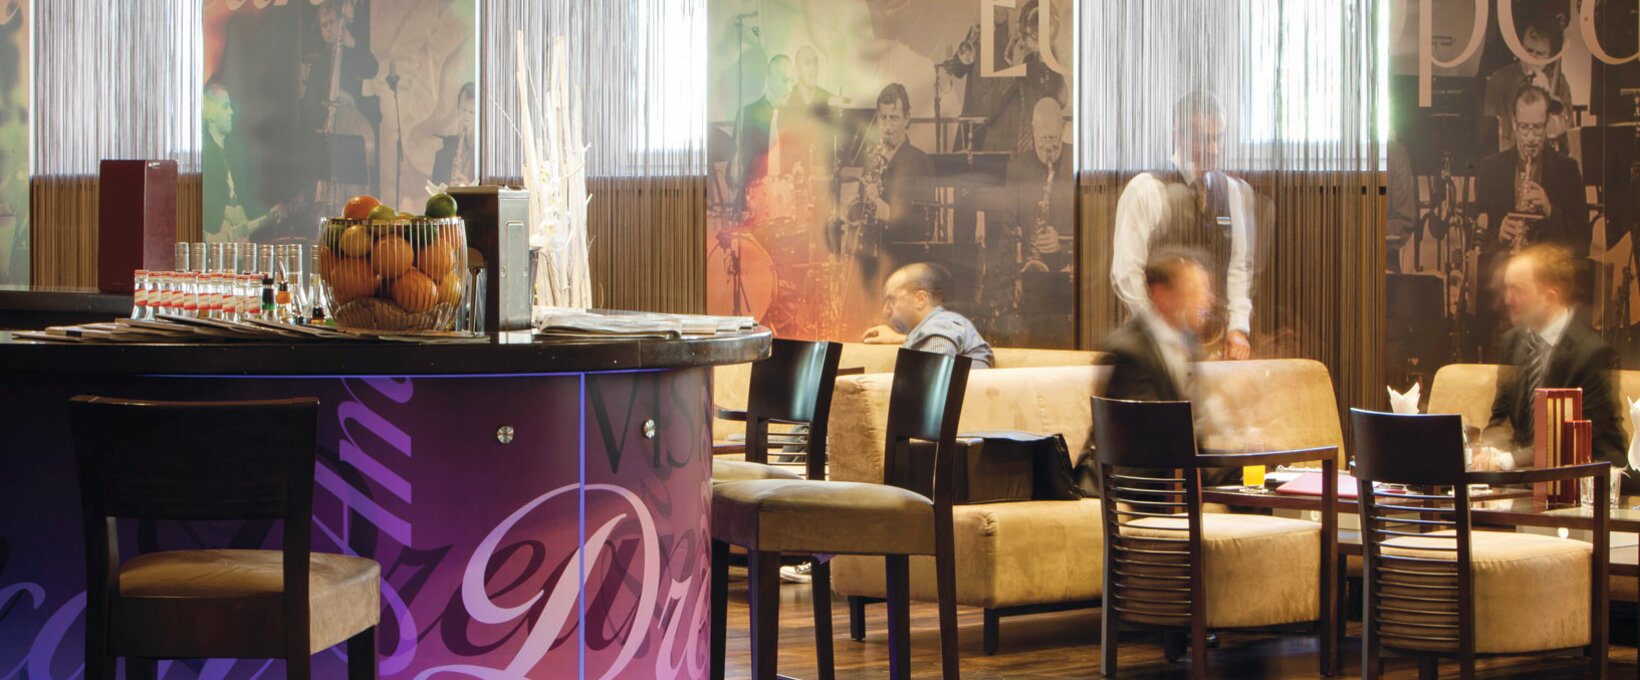 Hotelbar Soissons with bar chairs and counter | Hotel Savoyen Vienna